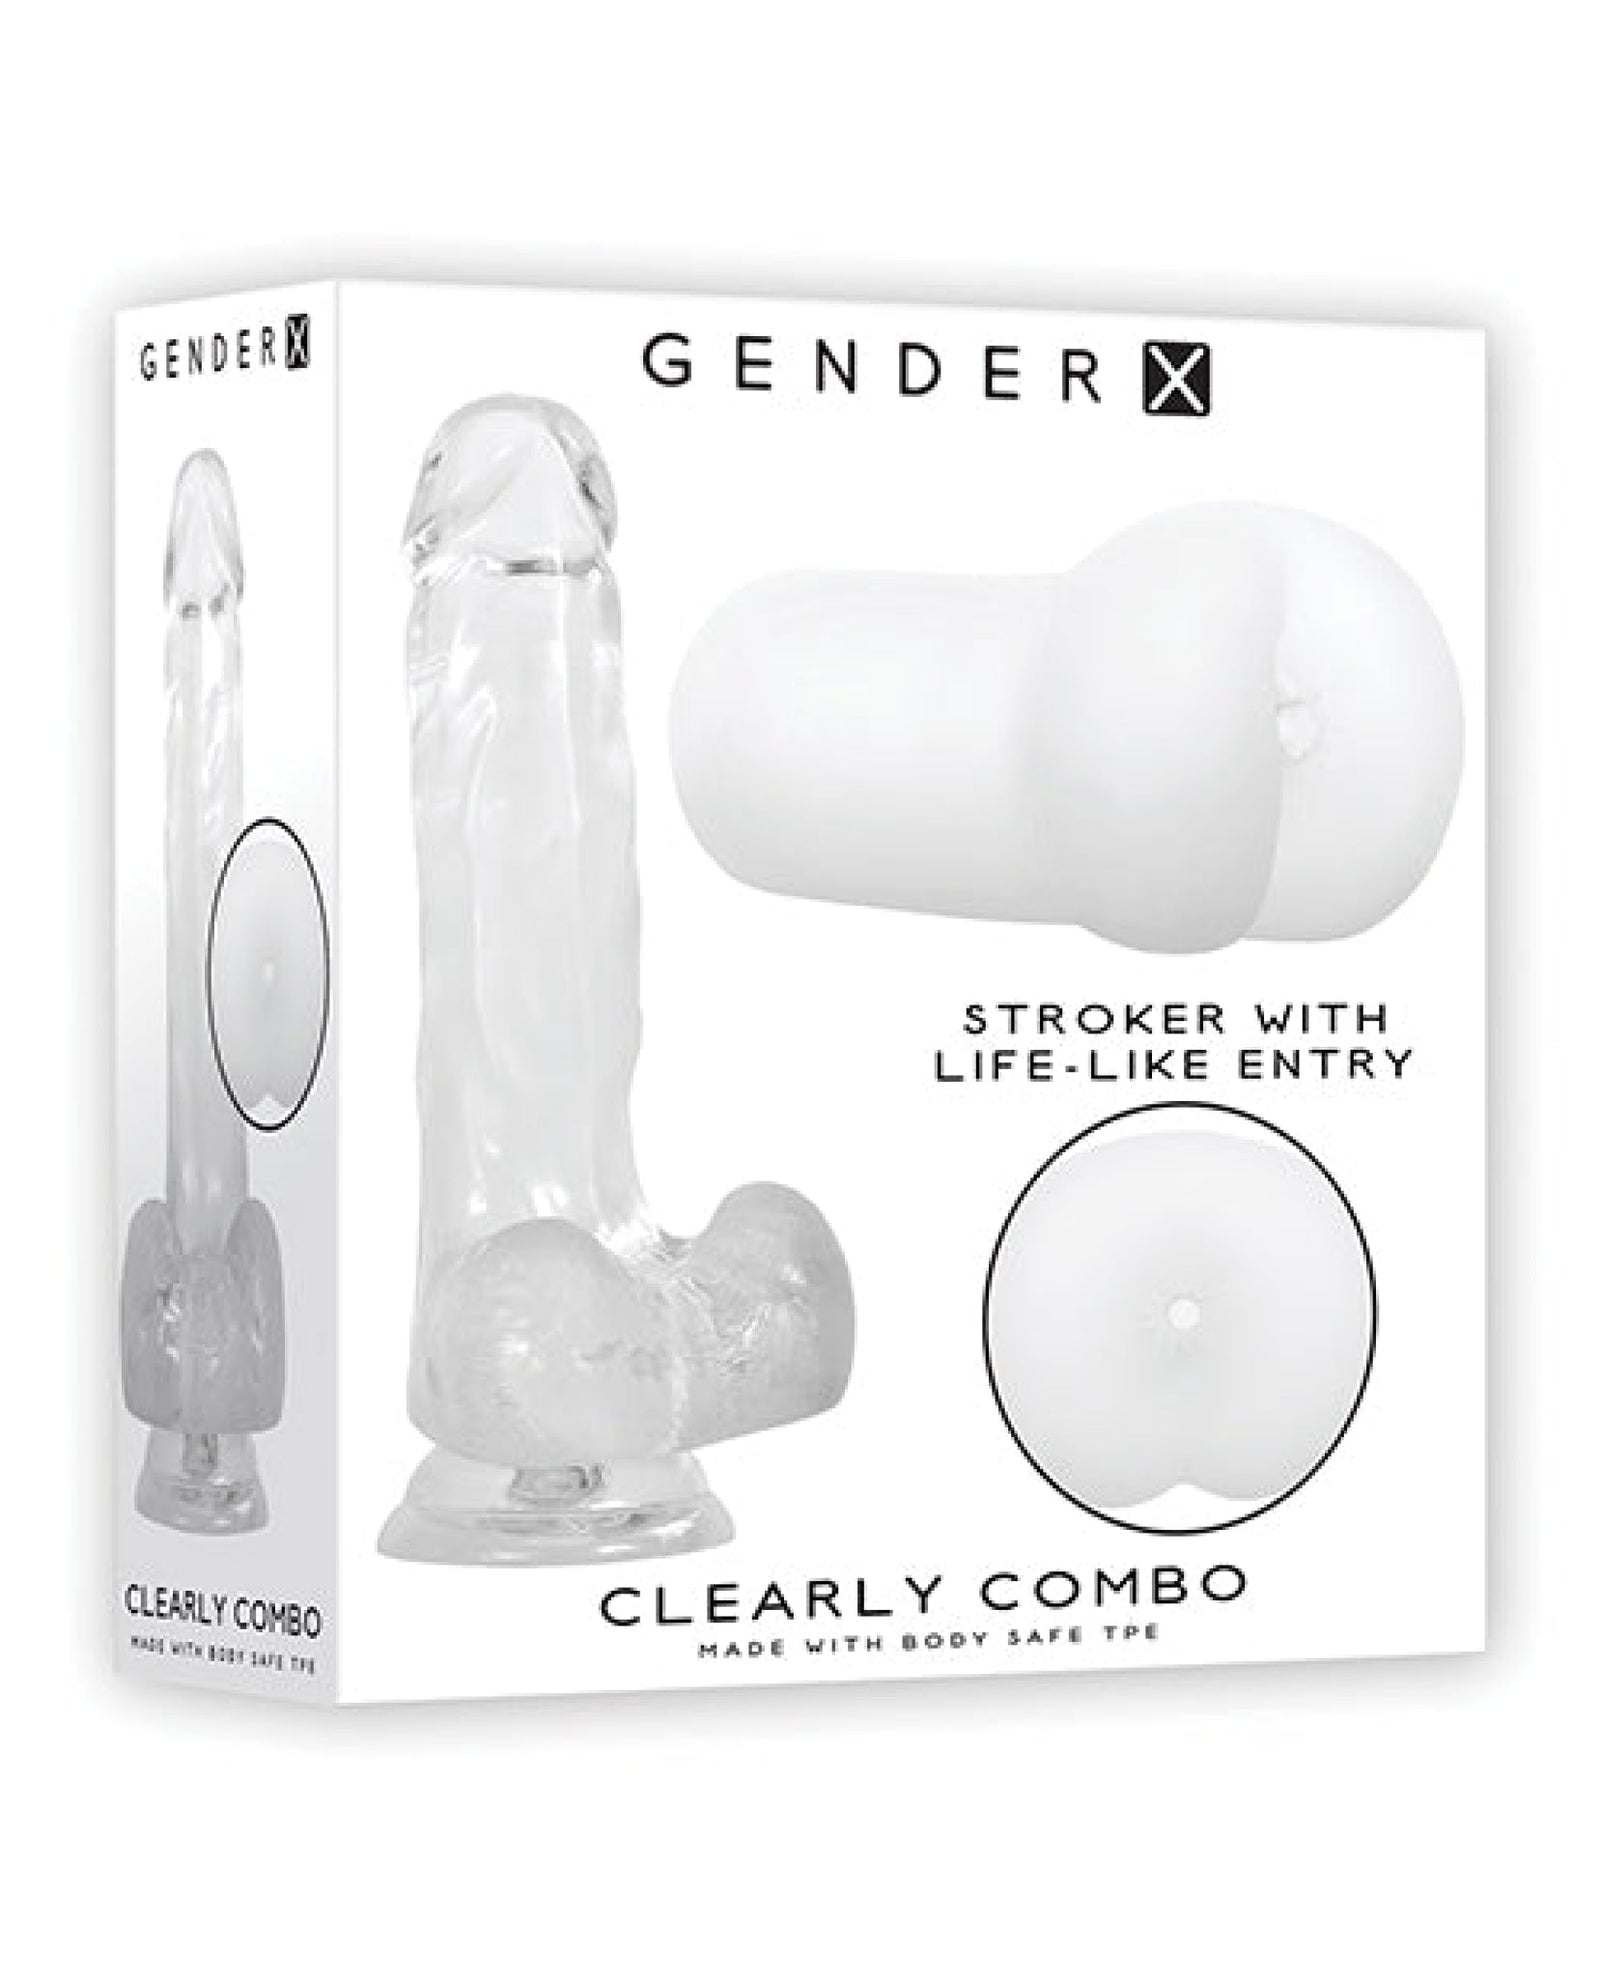 Gender X Clearly Combo - Clear Gender X